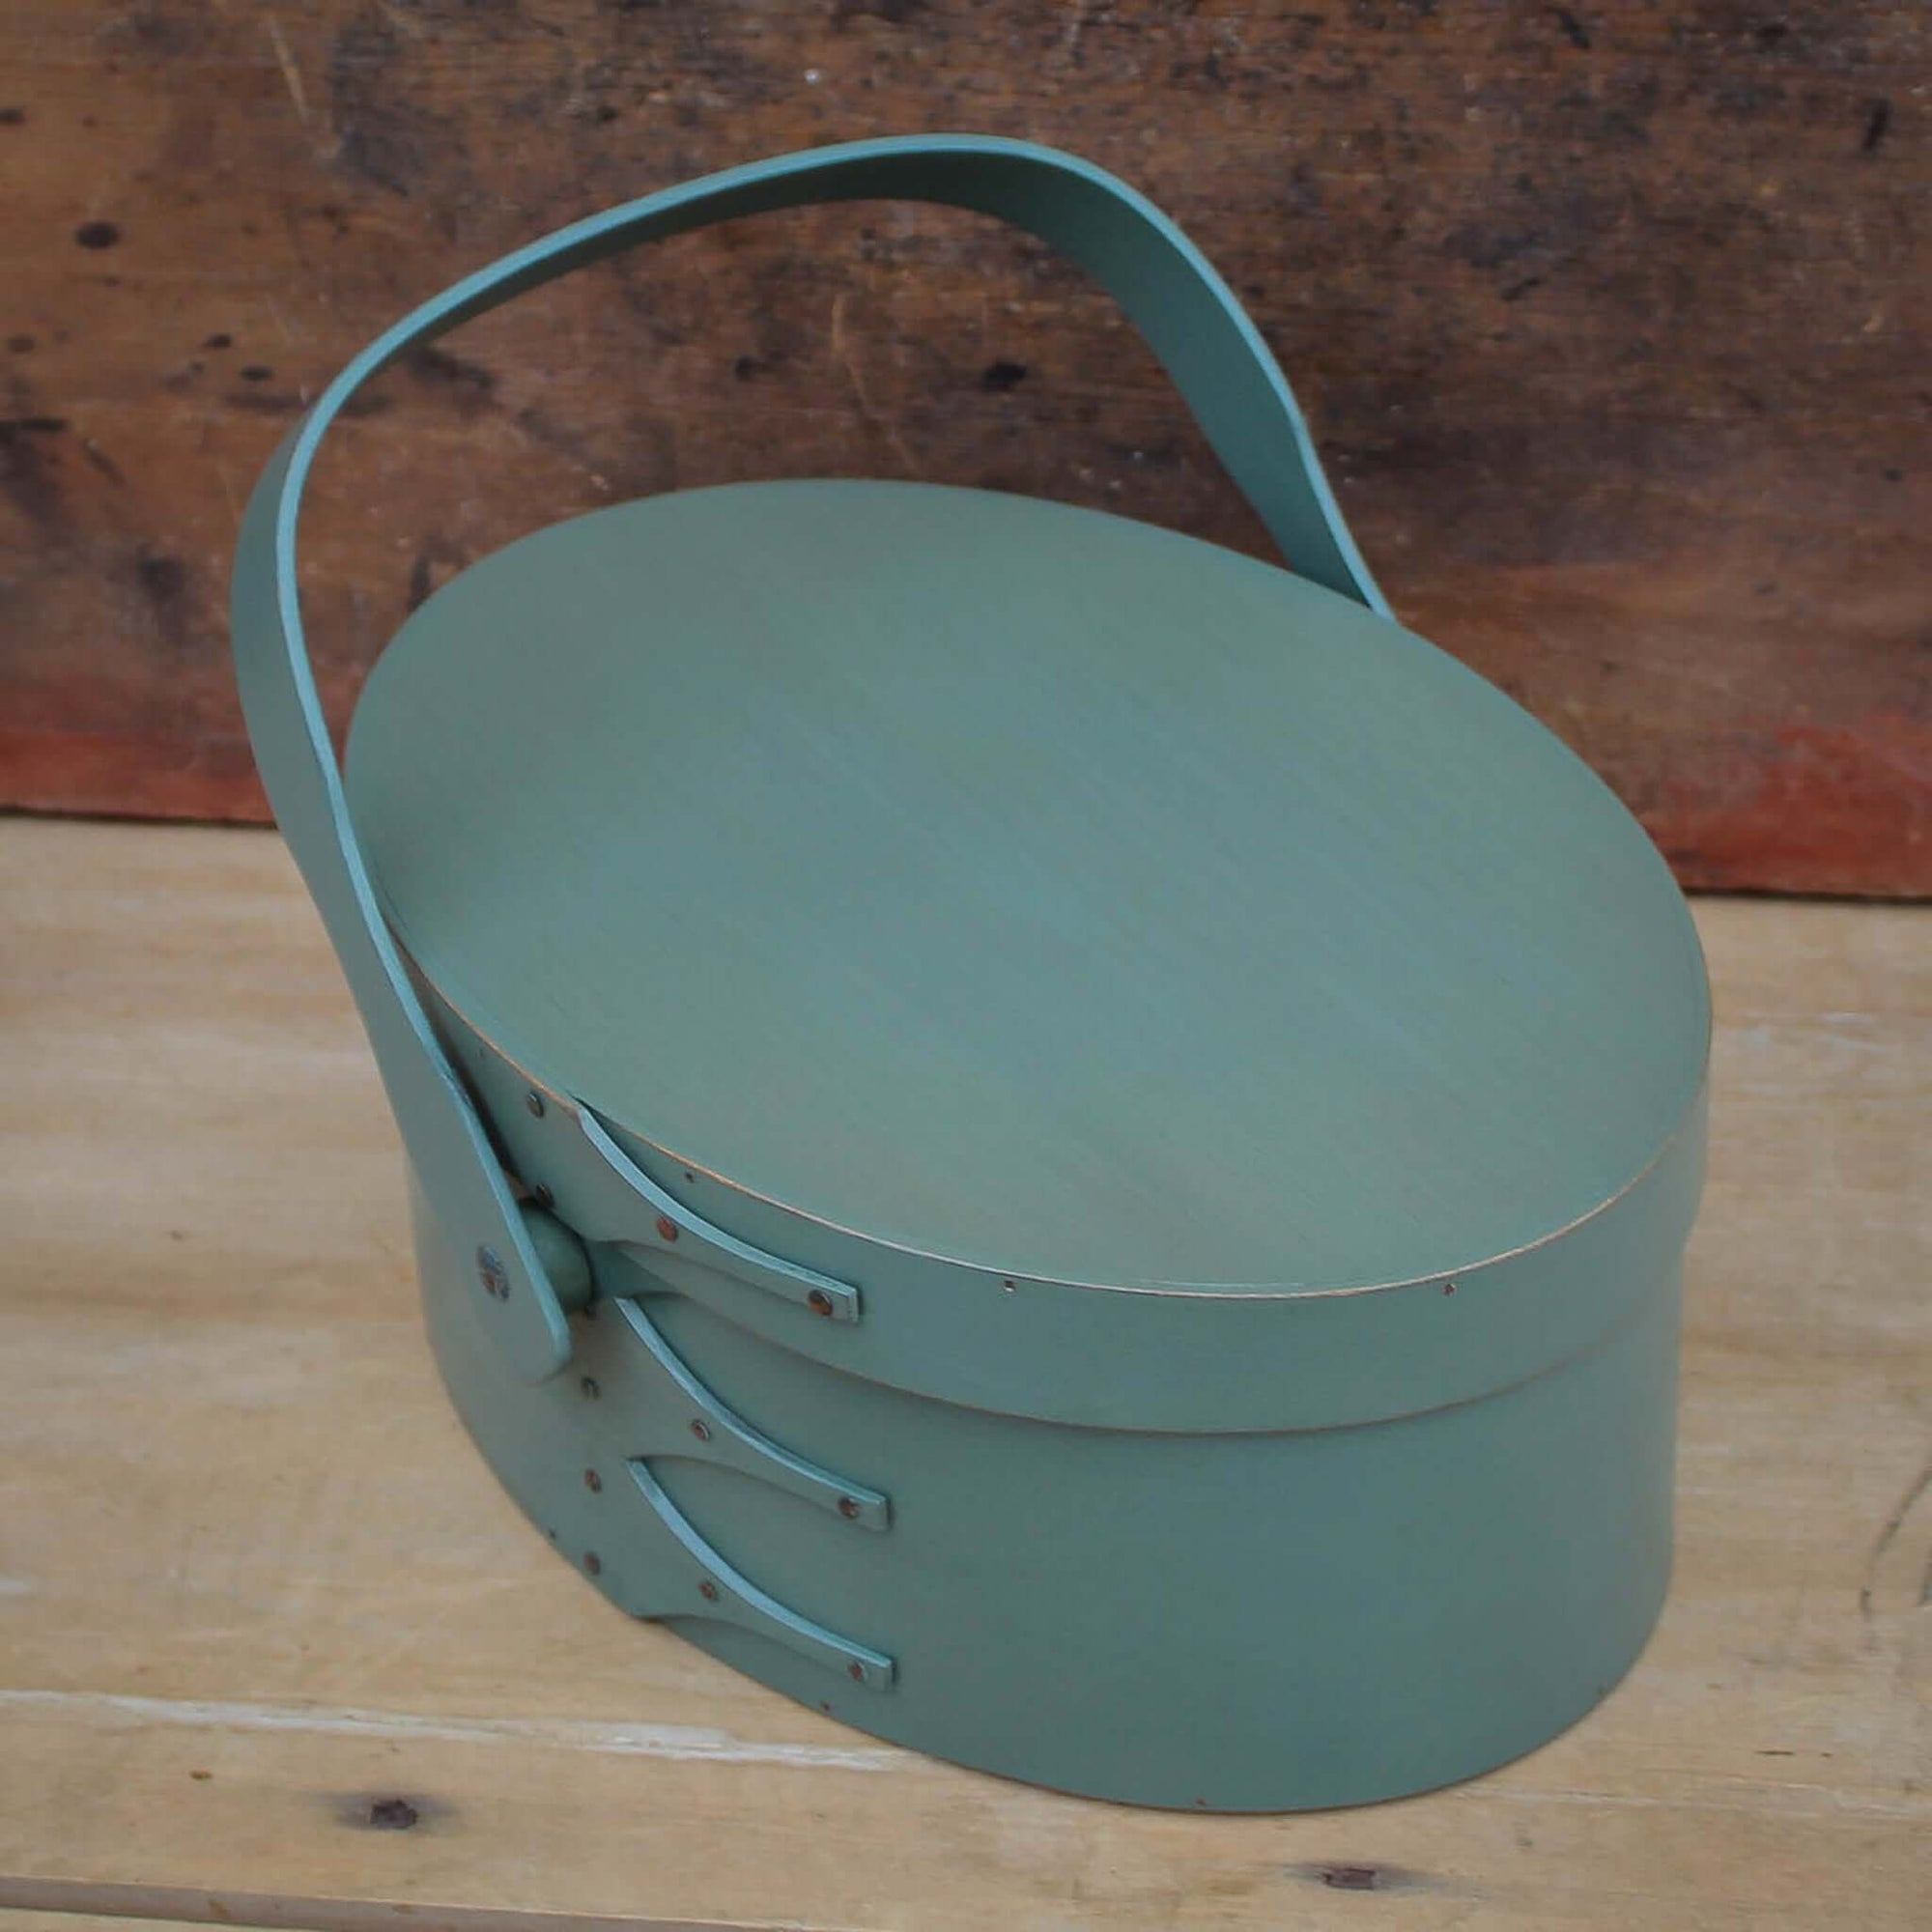 Shaker Swing Handle Carrier, LeHay's Shaker Boxes